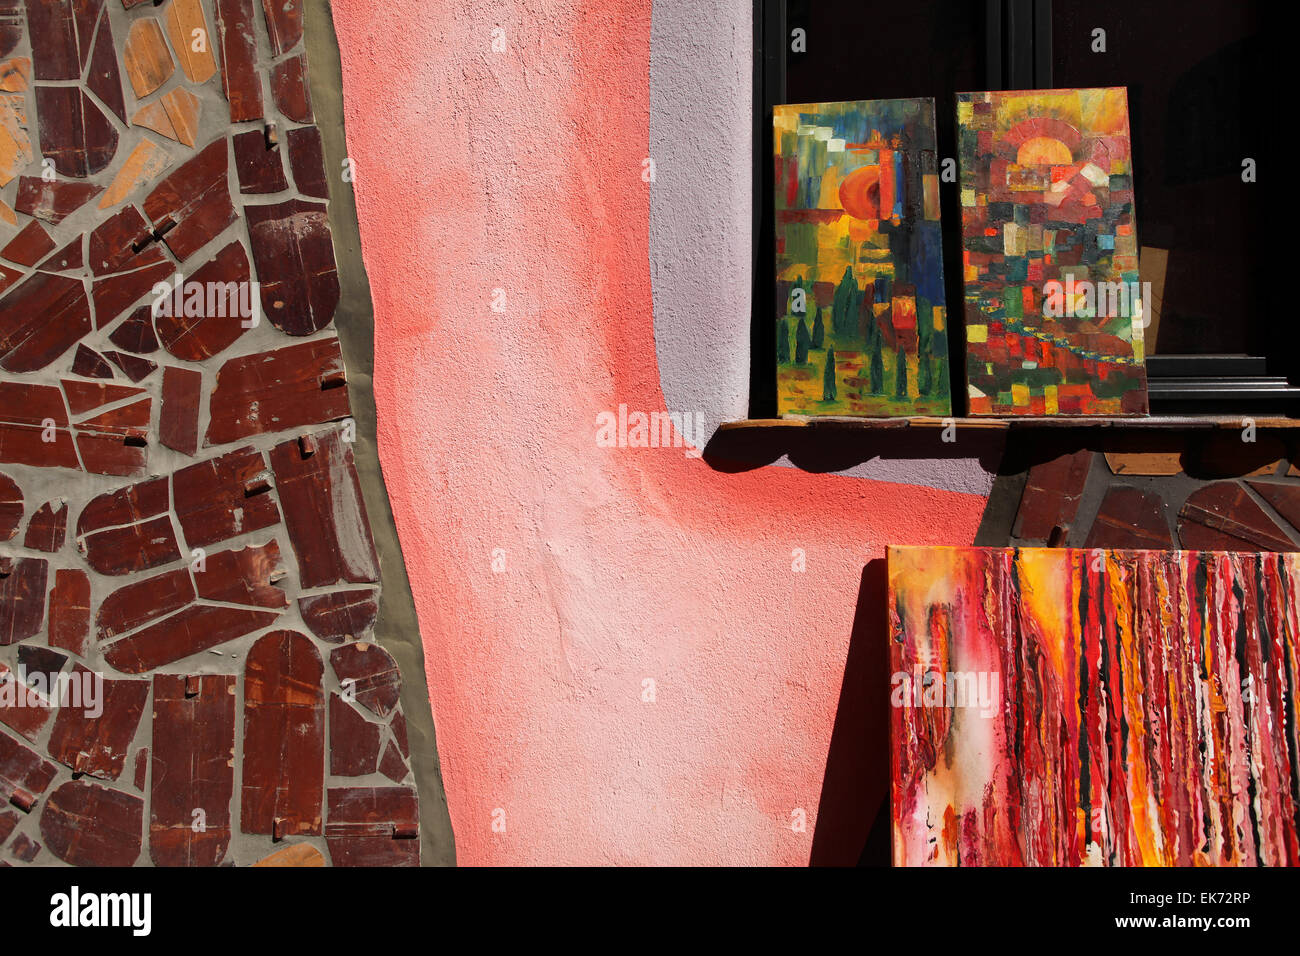 Exhibited paintings of a shop in the Green Citadel, designed by the architect Friedensreich Hundertwasser. Magdeburg, Germany. Stock Photo